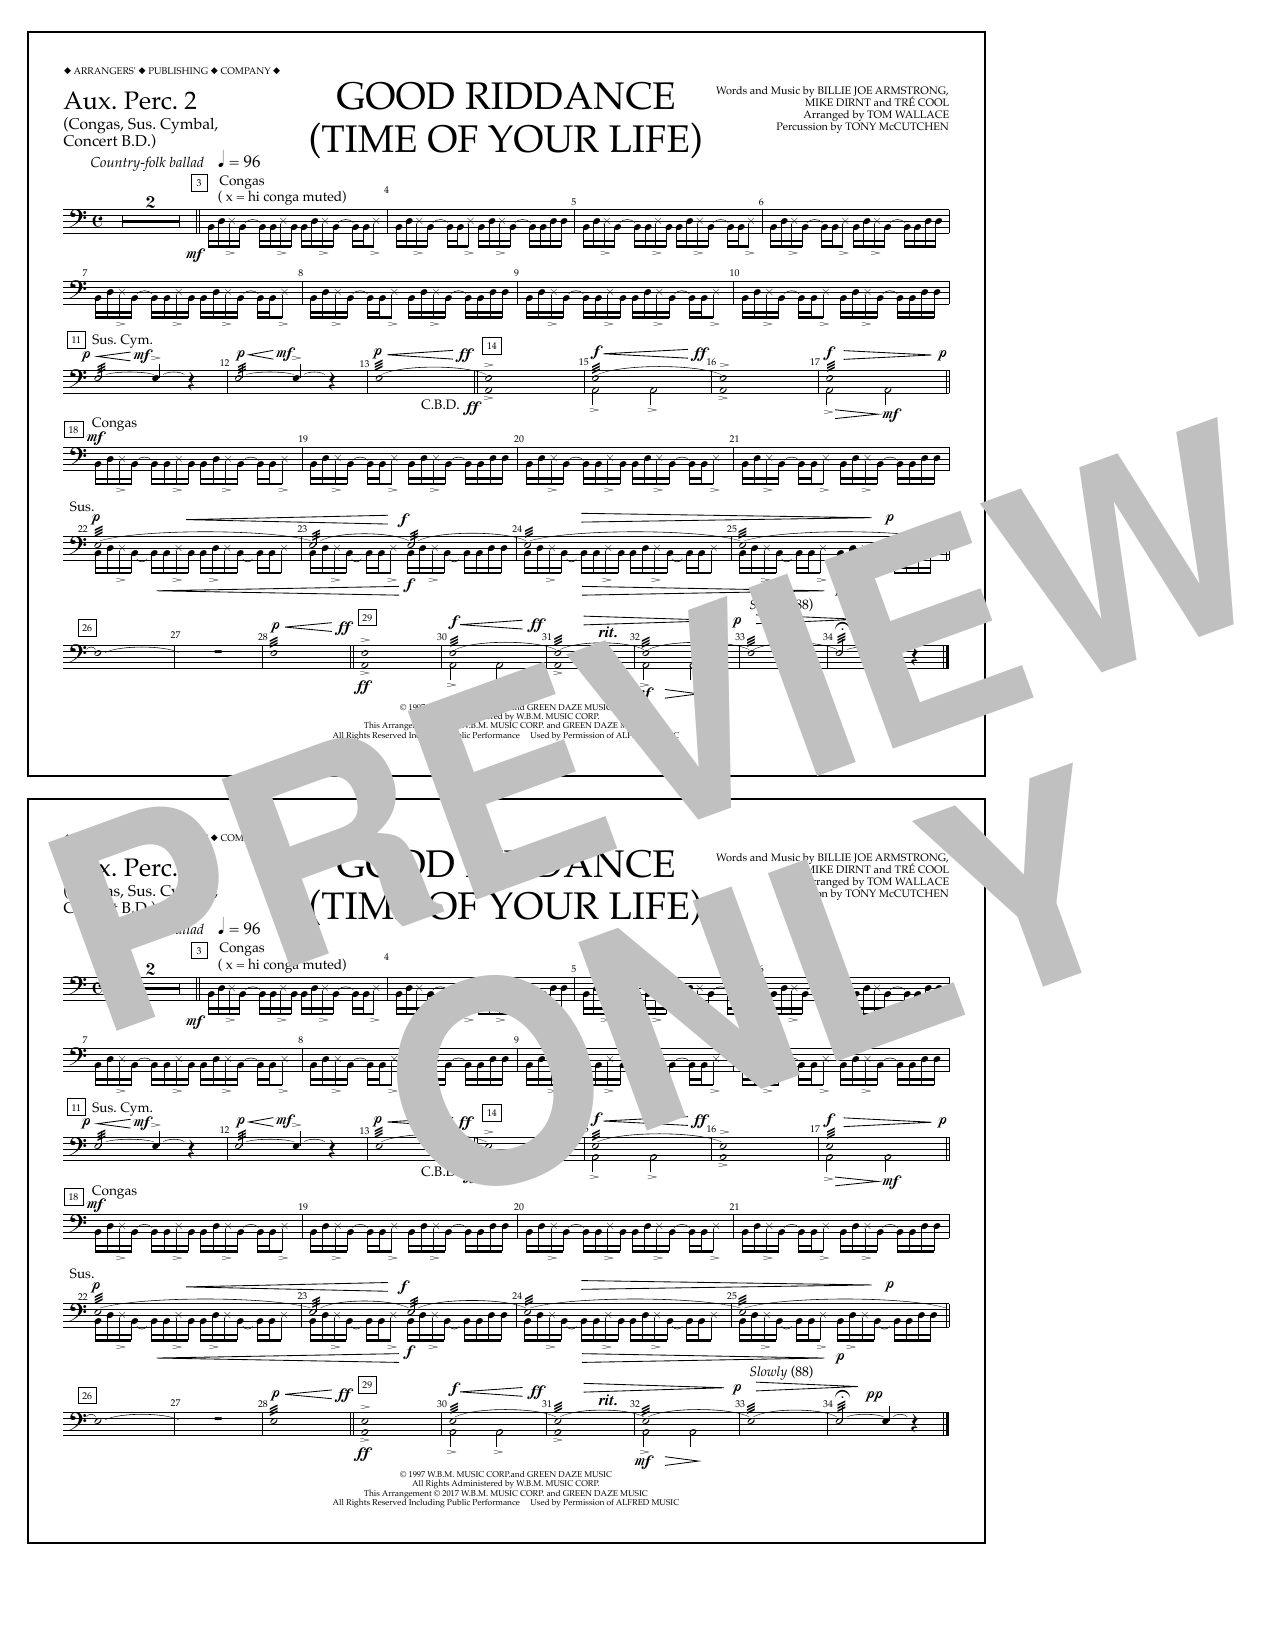 Download Tom Wallace Good Riddance (Time of Your Life) - Aux Sheet Music